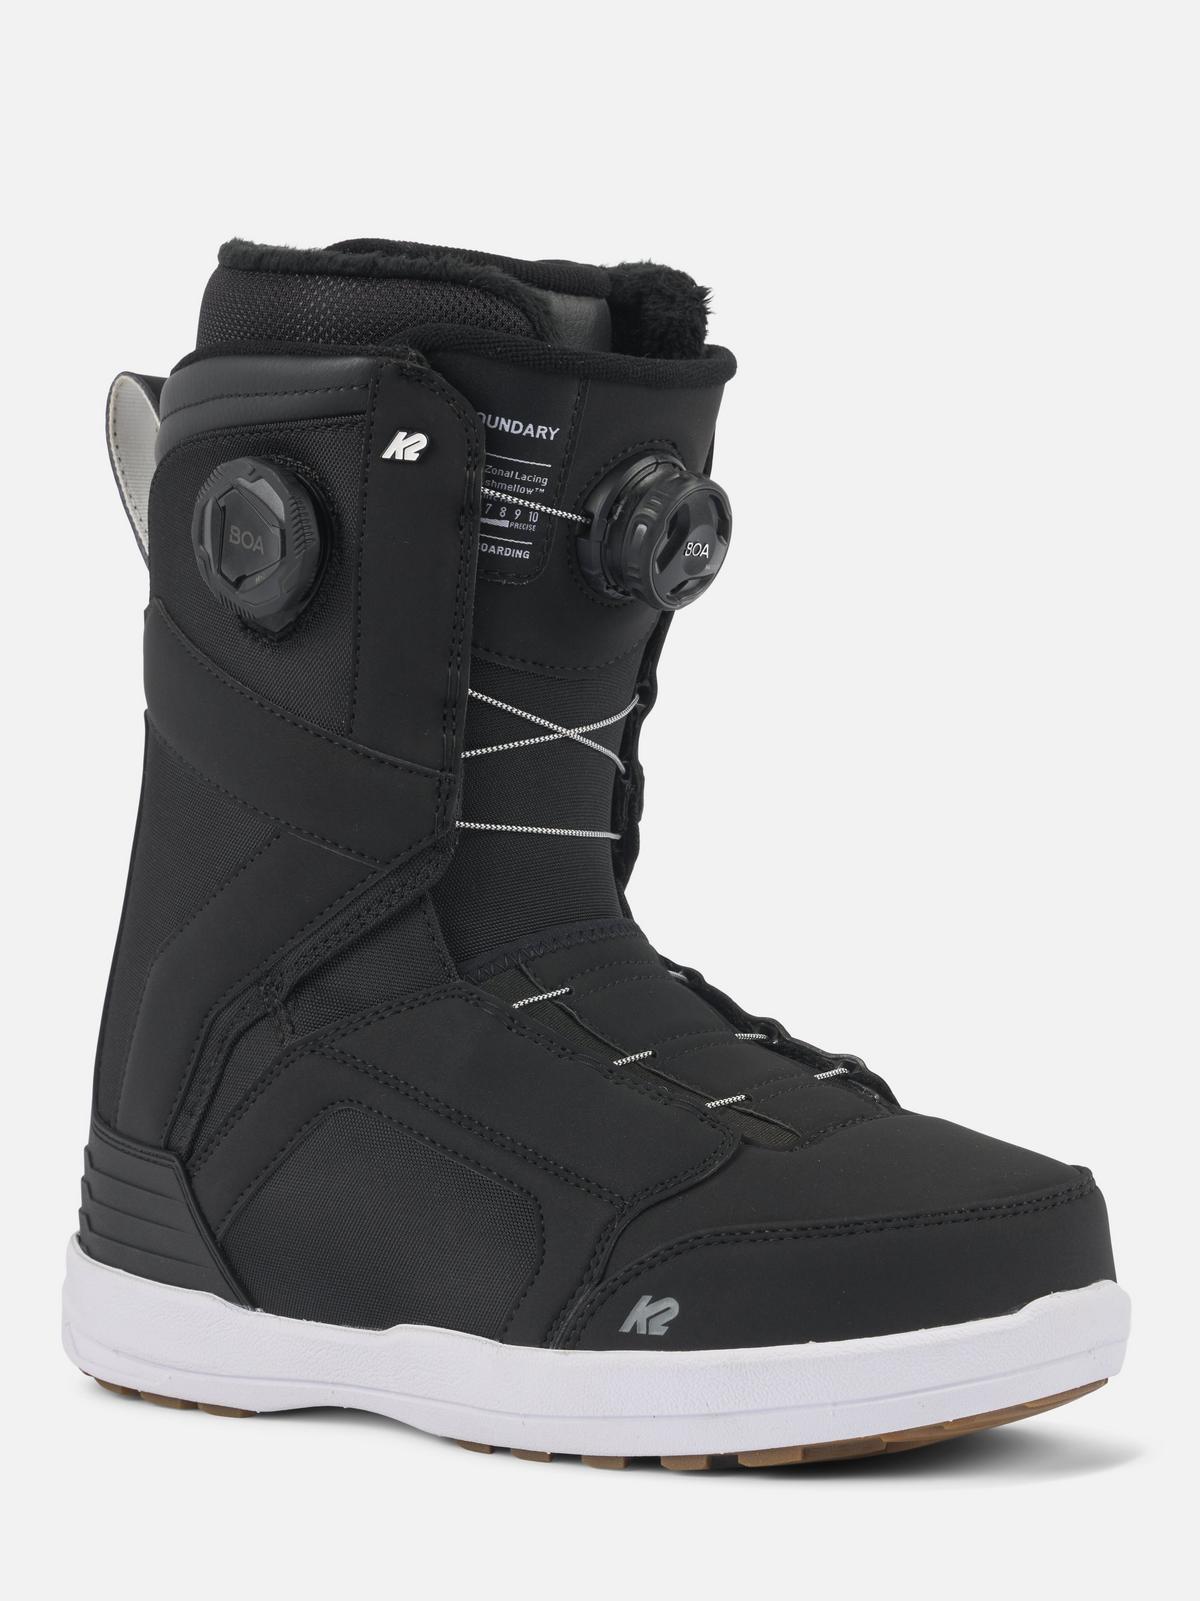 K2 Boundary Men's Snowboard Boots 2025 | K2 Skis and K2 Snowboarding